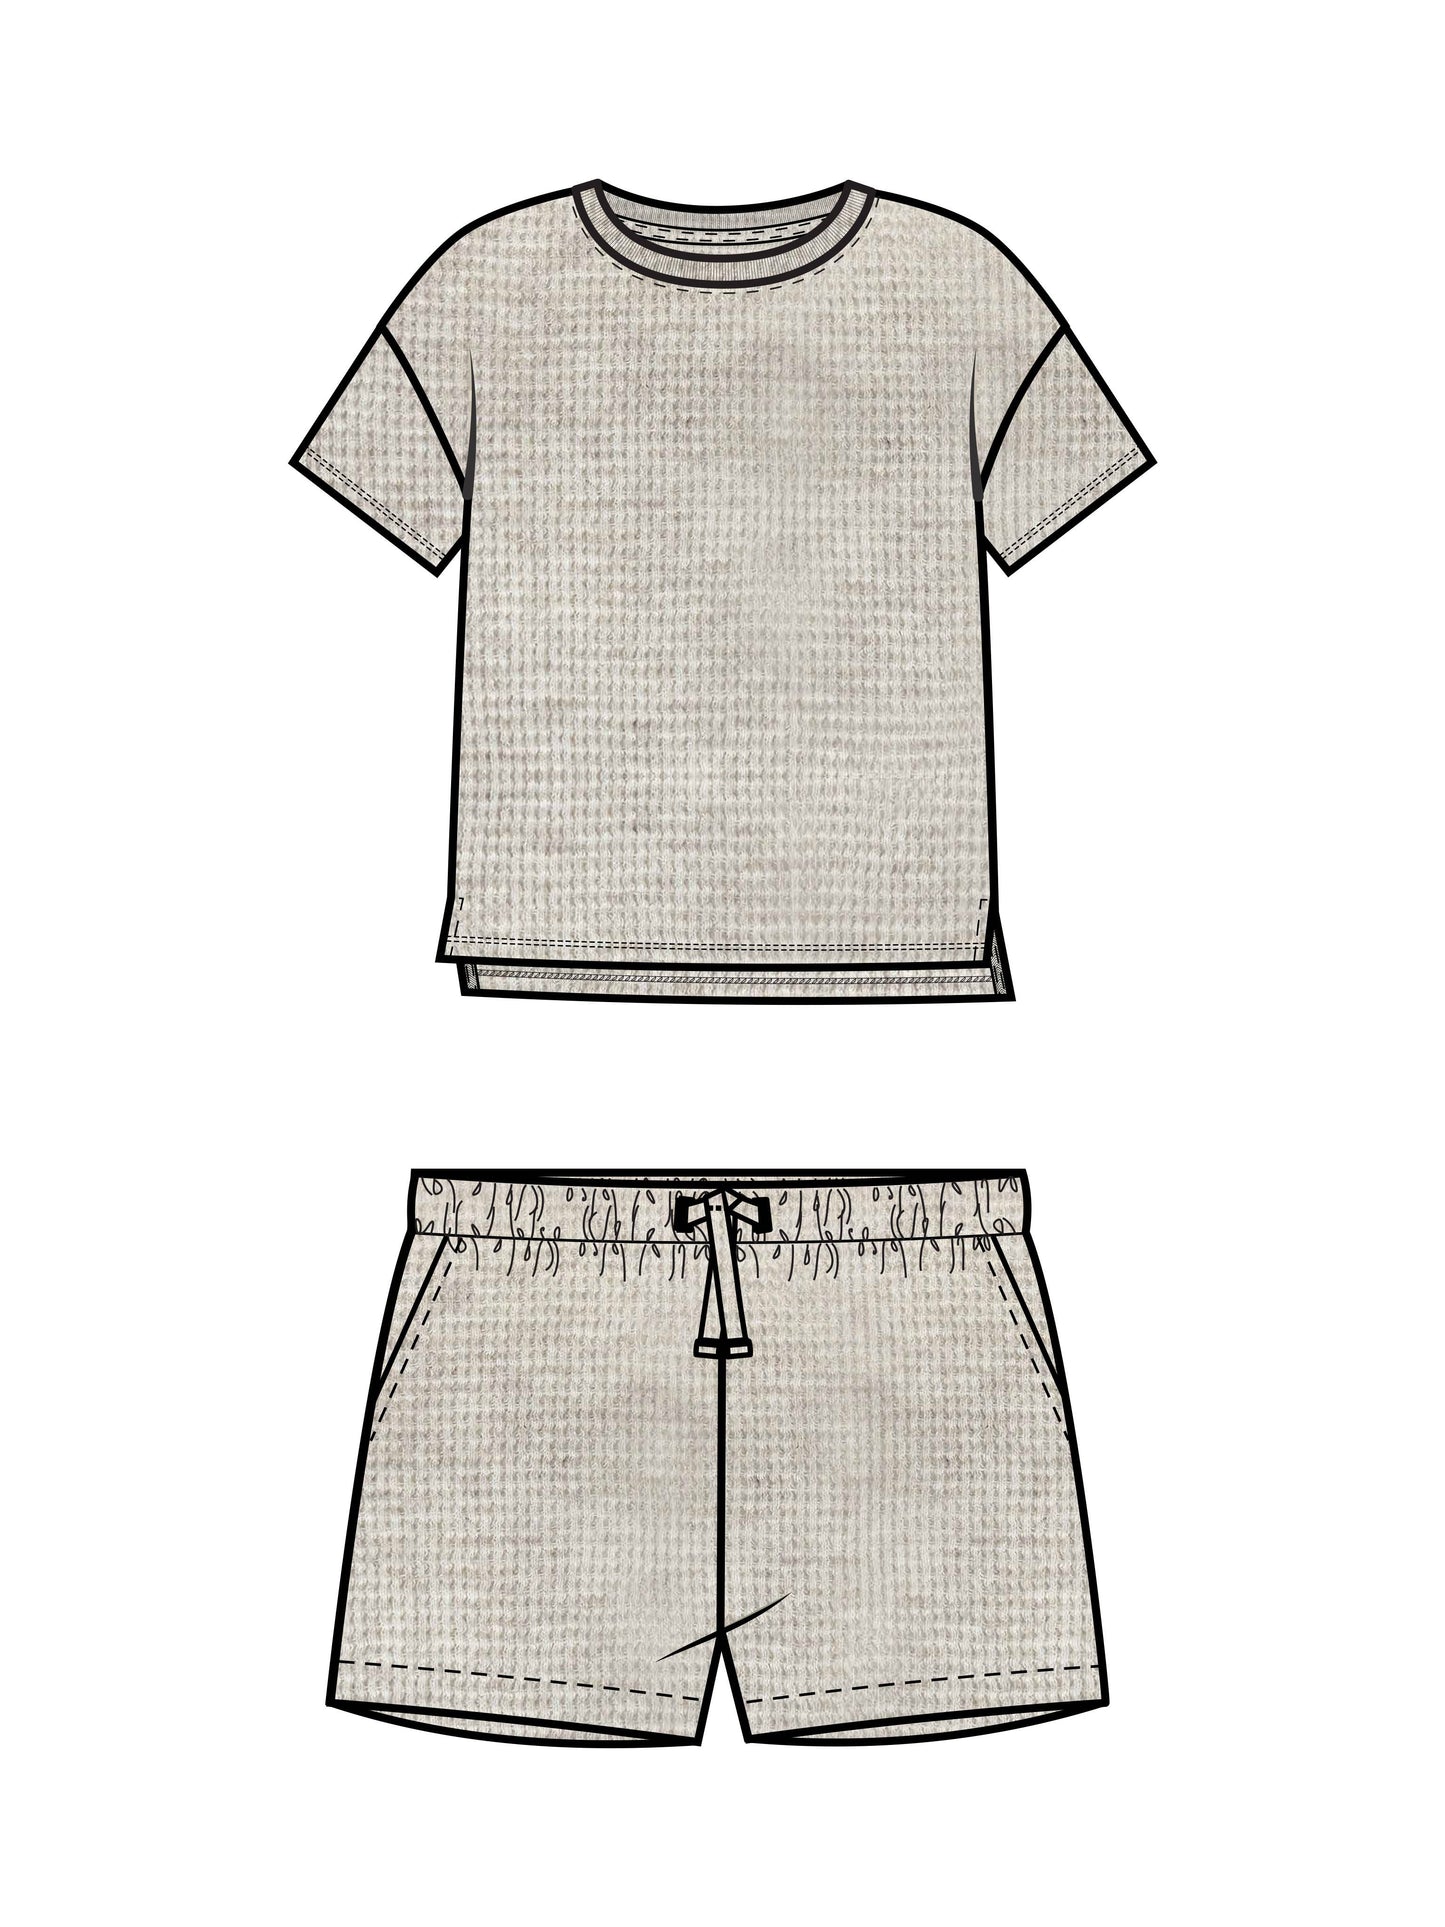 Organic Kids Odell Waffle Tee and Shorts Set - Heather Oat: 3T